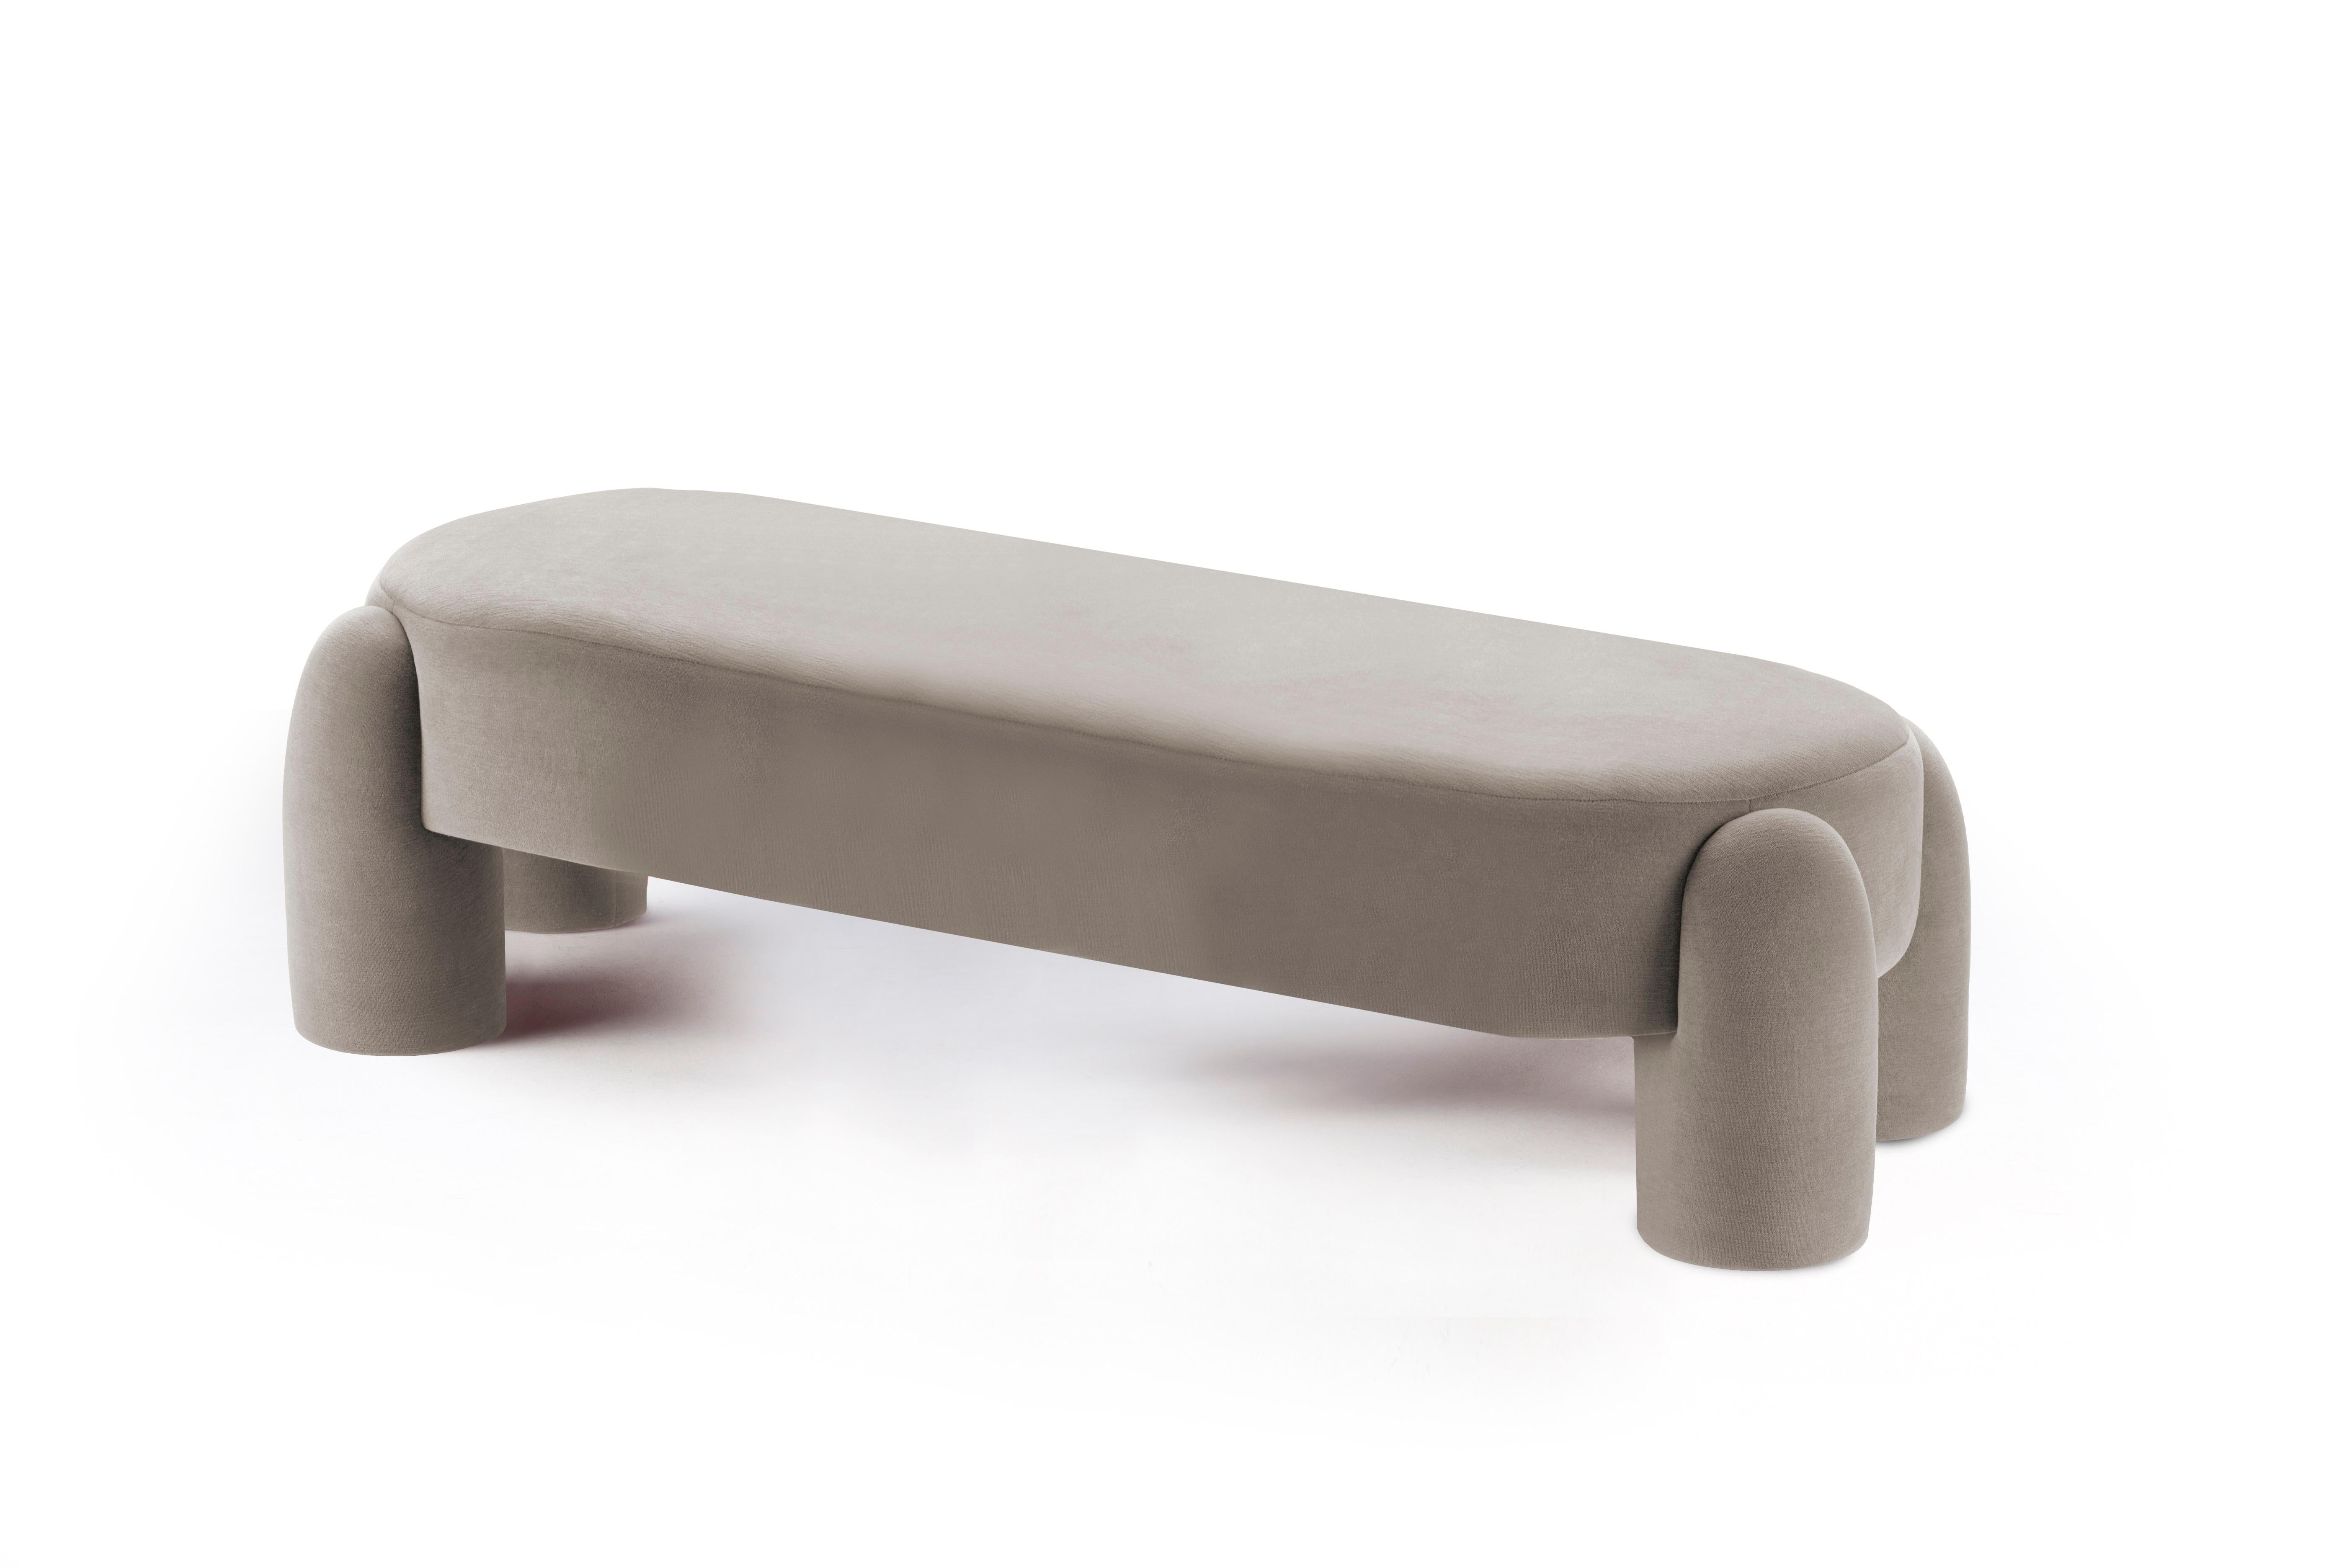 Marlon Daybed I by Pietro Franceschini
Dimensions: W 70 x D 150 x H 40 cm
Available in other size: D190 cm.

Materials & Finishes
Upholstery: fully upholstered in fabric or leather.

Product
When pure geometry meets soft curves, something sculptural